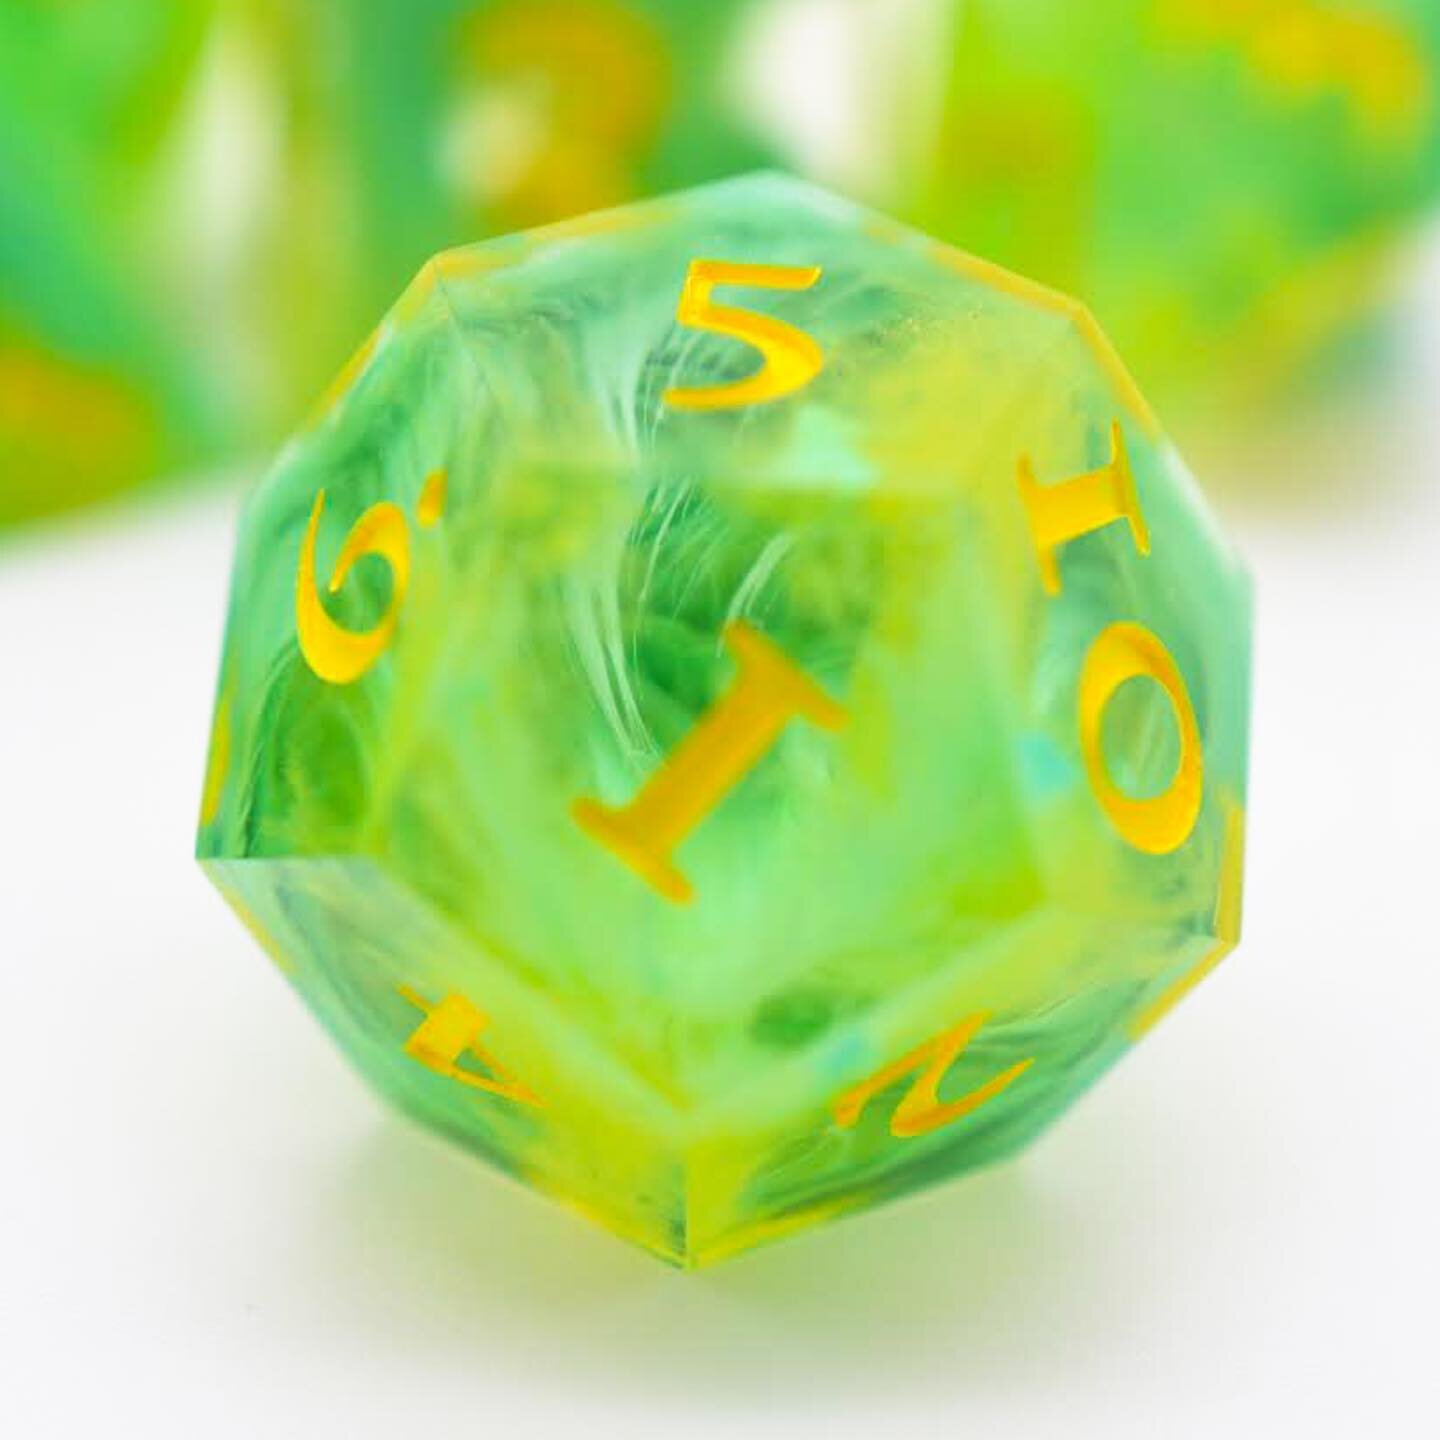 Summer breeze. Inked. 

Teal and yellow cascade through the dice to meet in a pool of teal. 

#dice #handmade #diceset #resin #dicelove #handmadedice #handmadewithlove #pathfinder #diceporn #rpgdice #dnd #dungeonsanddragons #ttrpg #d20  #alumilite #s